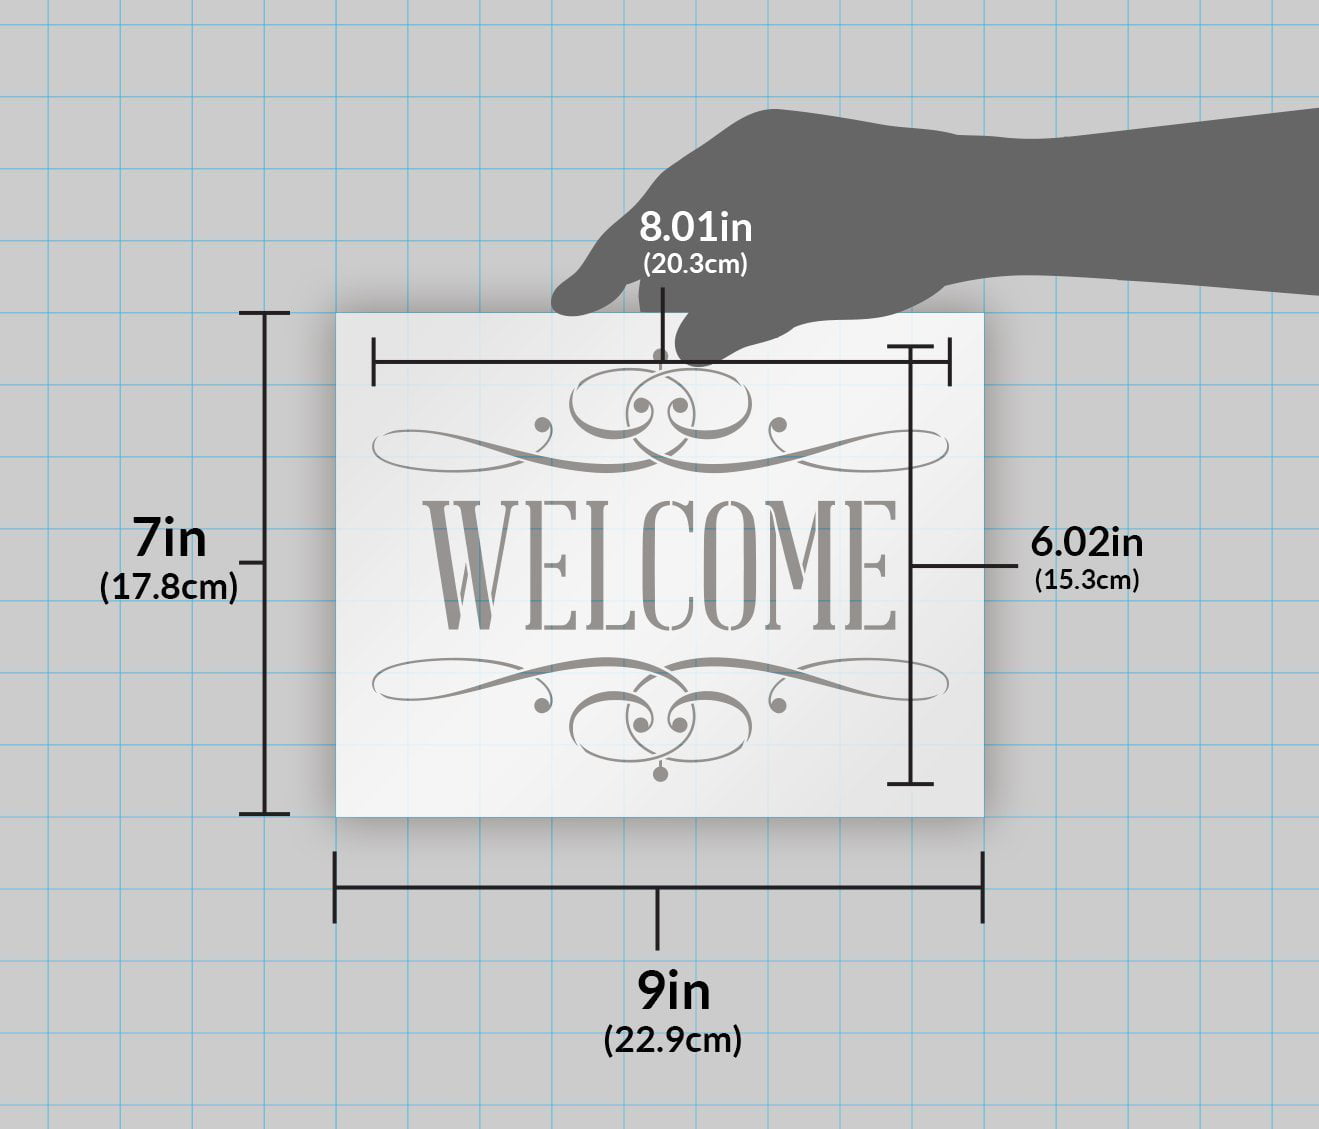 Welcome - Word Stencil - 12 x 5.5 - STCL310_2